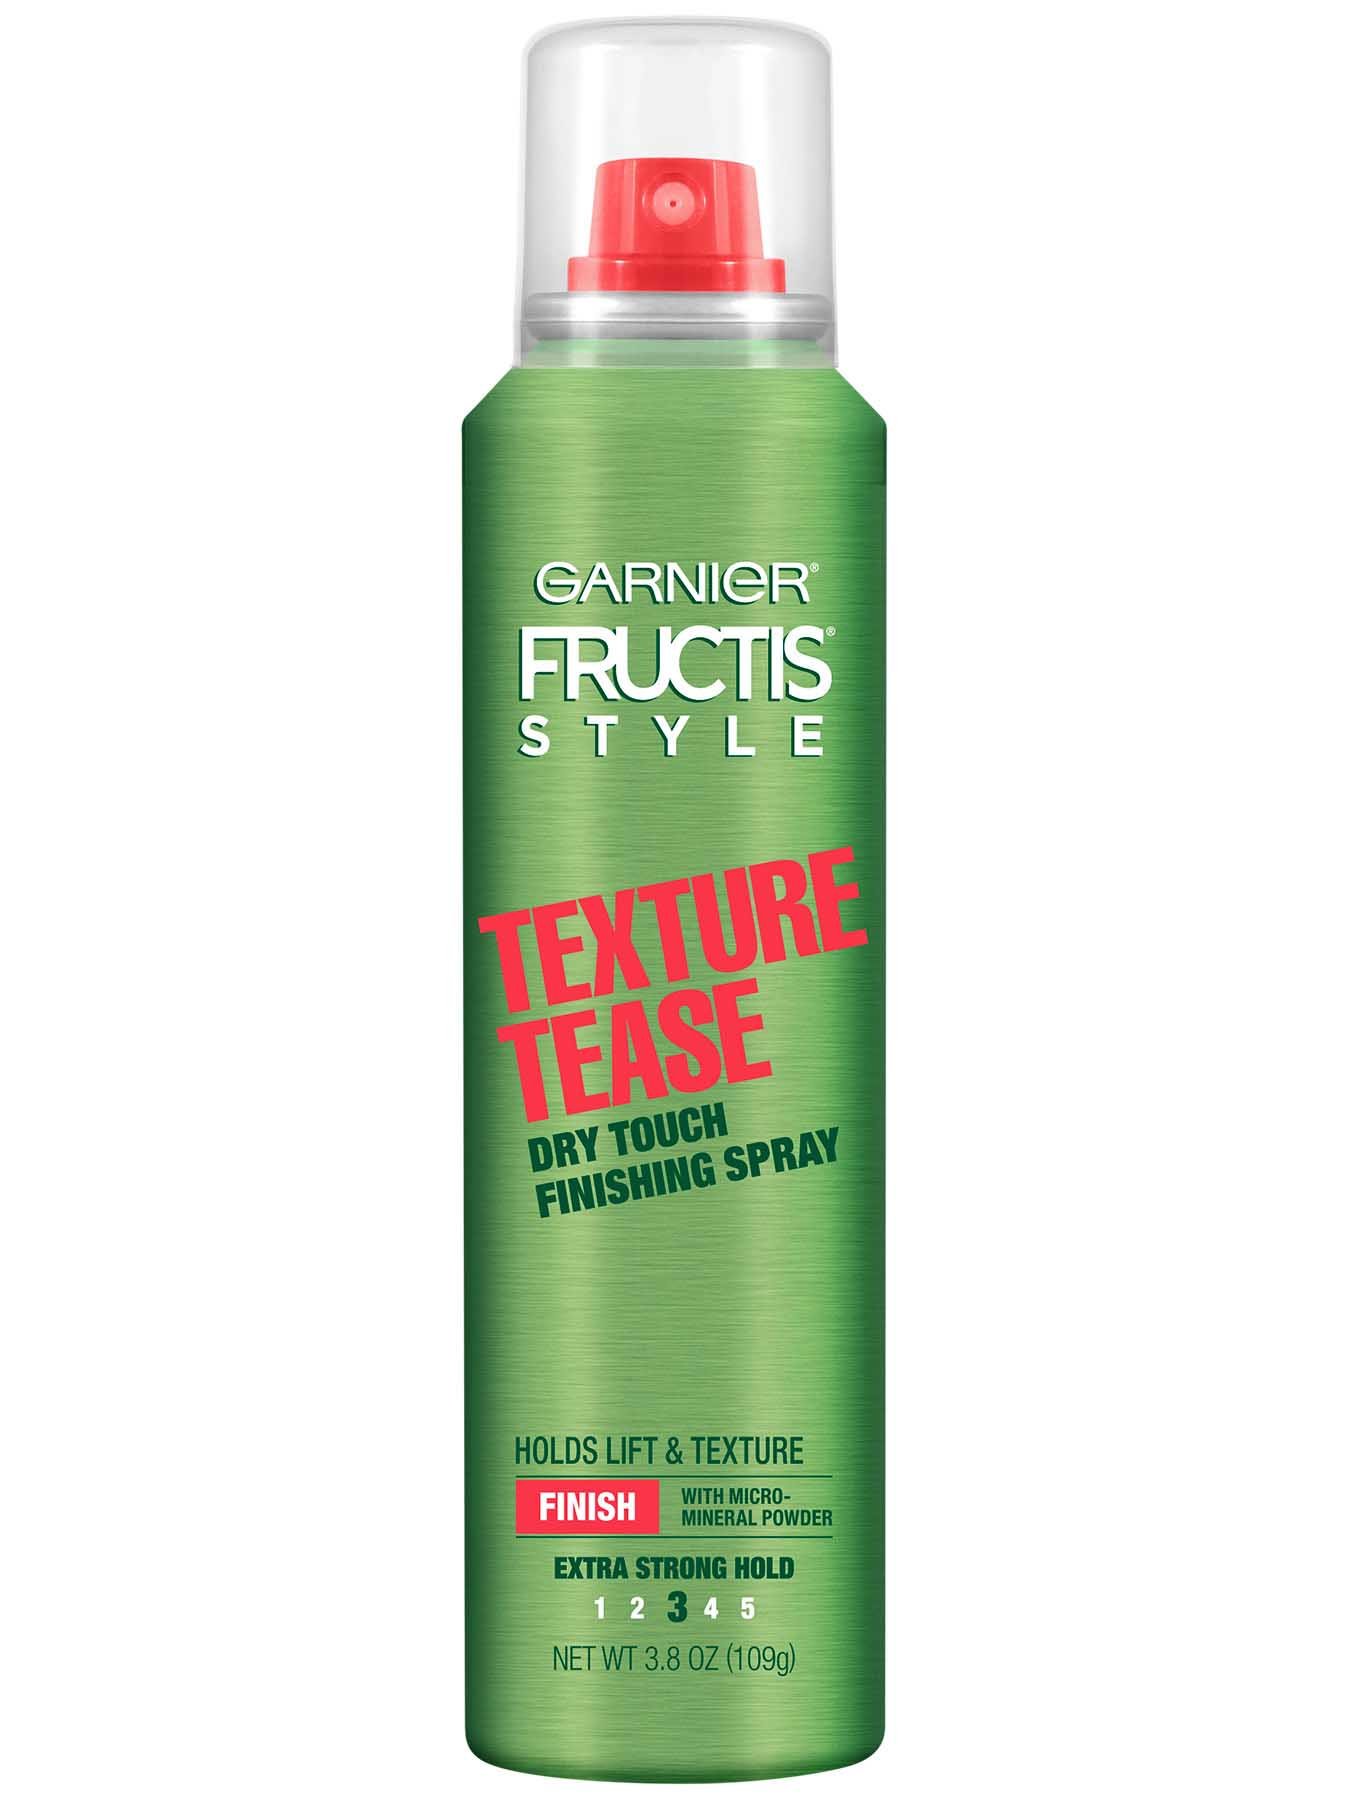 Front view of Texture Tease Dry Touch Finishing Spray.